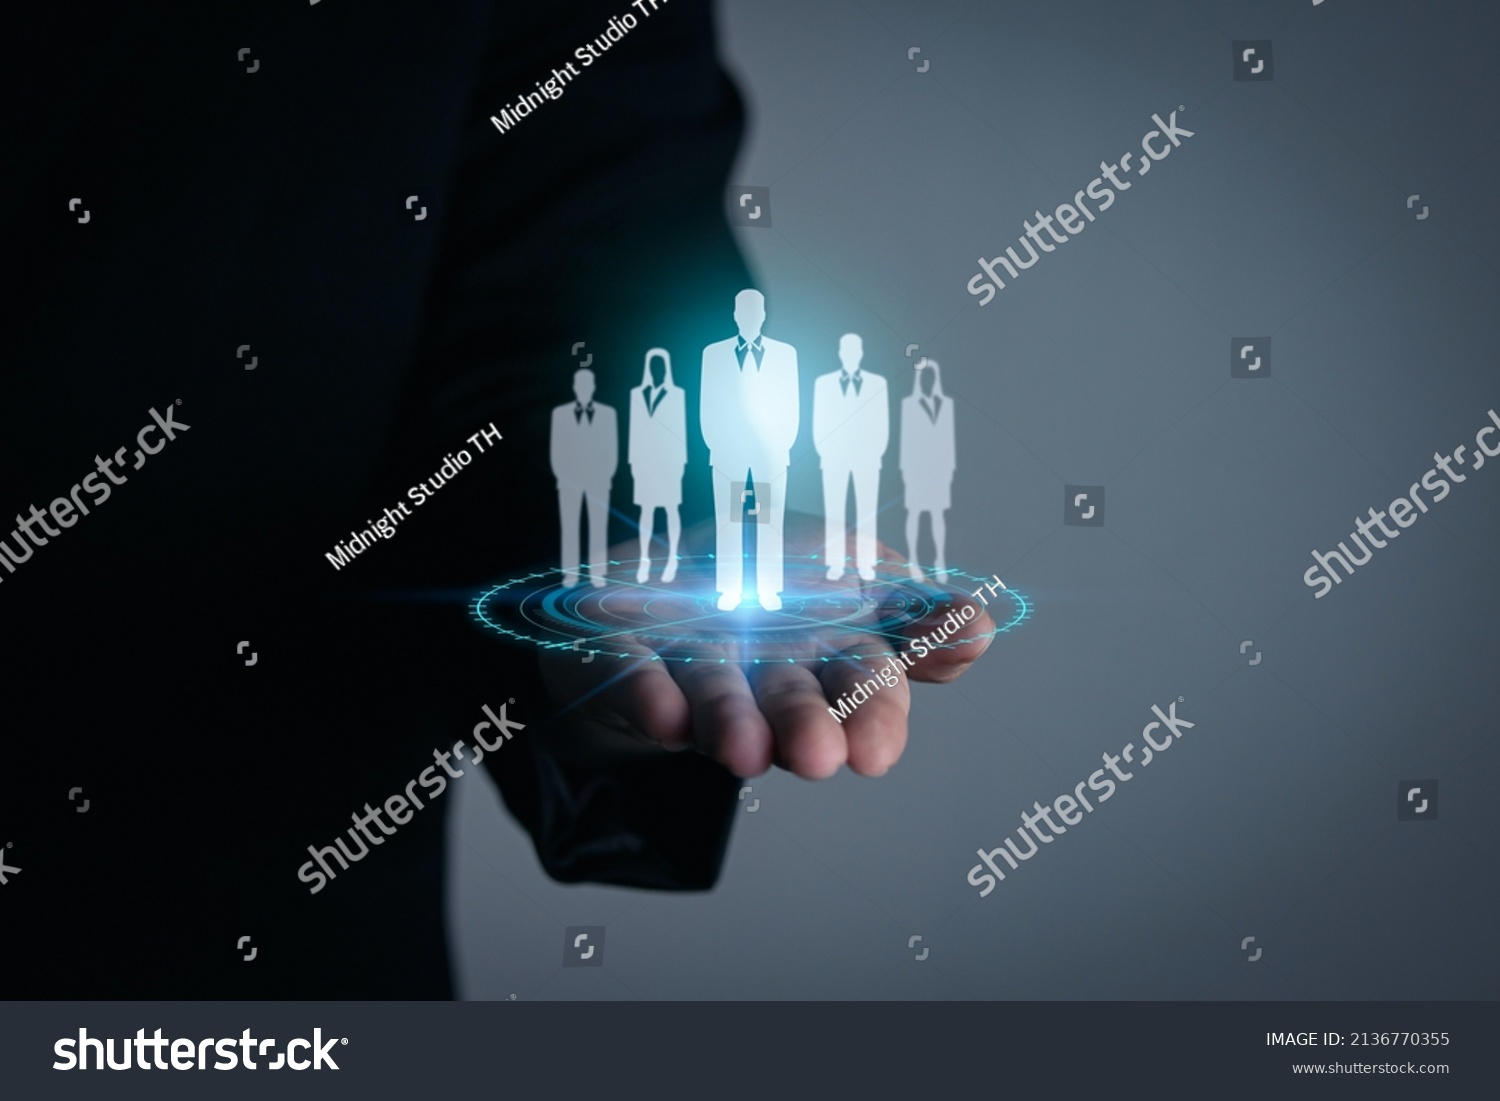 Personnel recruitment concept, job placement, strategic planning for personnel management and teamwork for success. businessman hand holding virtual businessman icon #2136770355